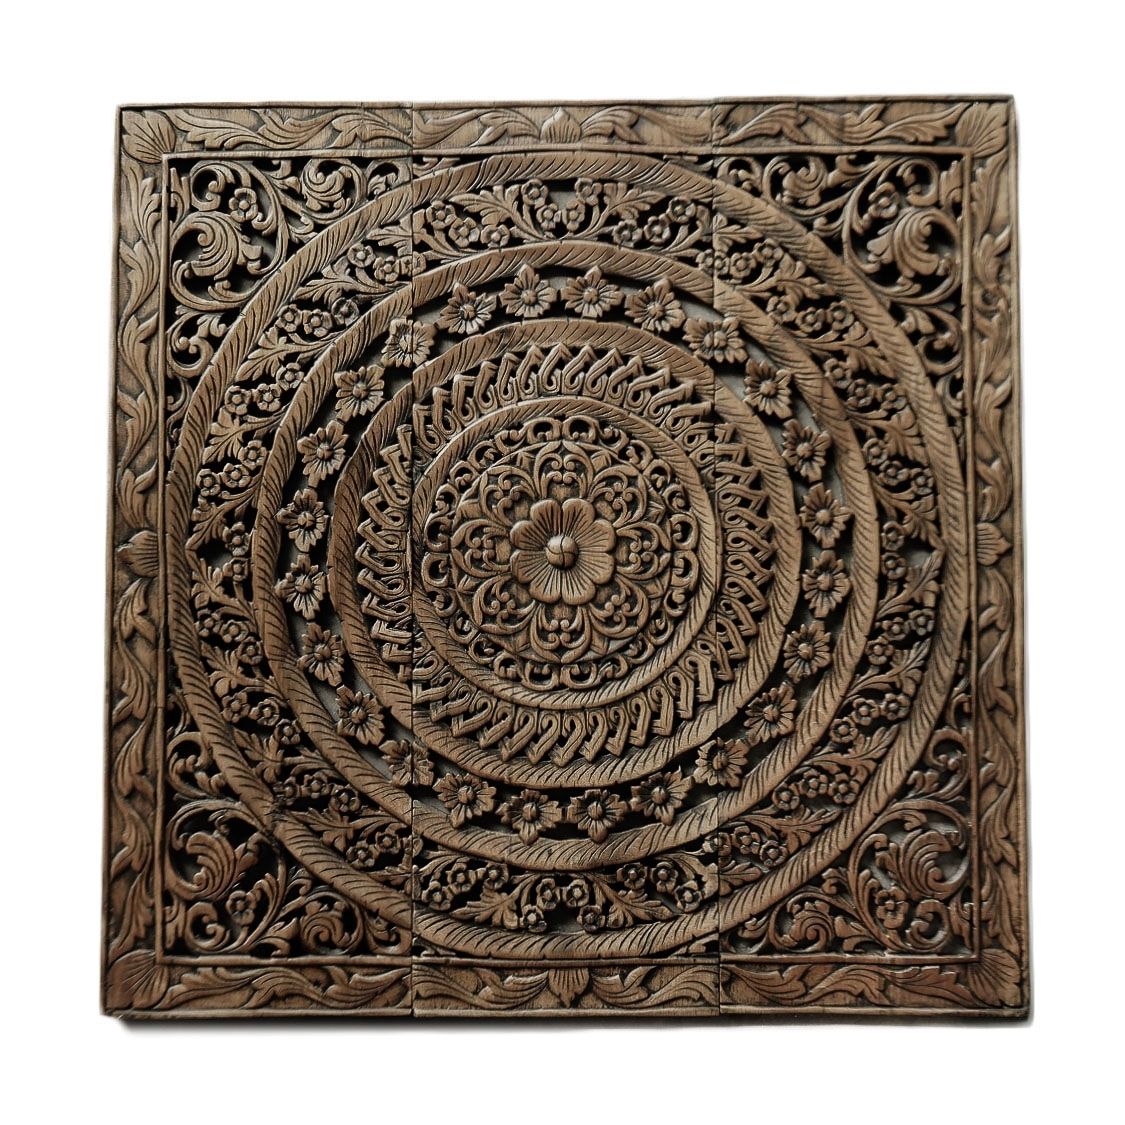 Moroccan Wood Wall Art – Elitflat With Regard To Most Current Moroccan Wall Art (Gallery 8 of 20)